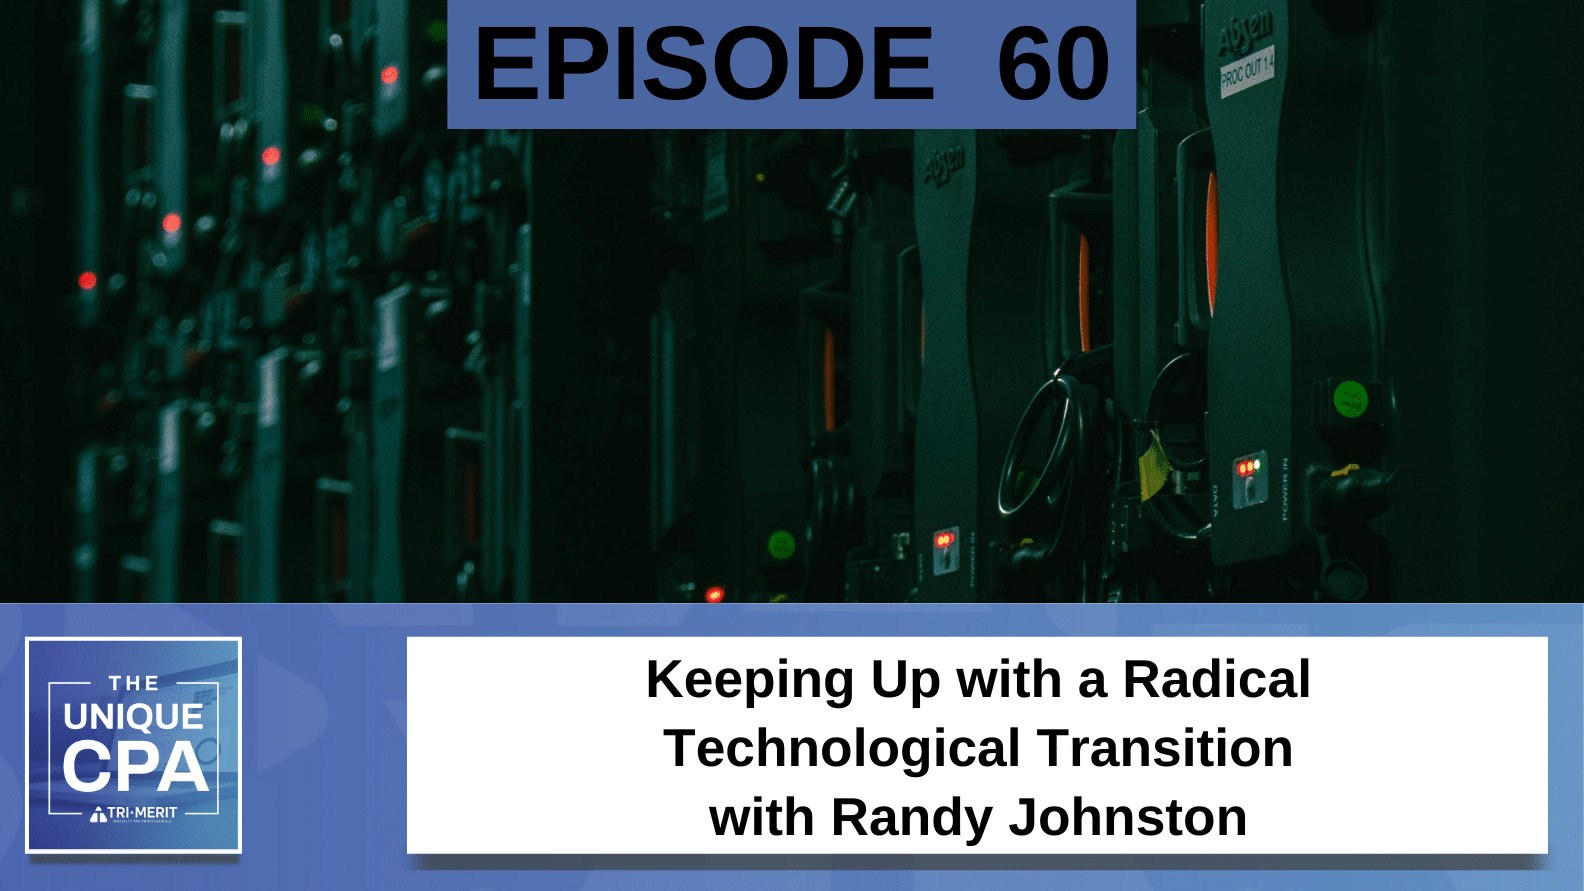 Unique Cpa Featured Image Ep 60 Randy Johnston 1 - Keeping Up With A Radical Technological Transition - Tri-Merit